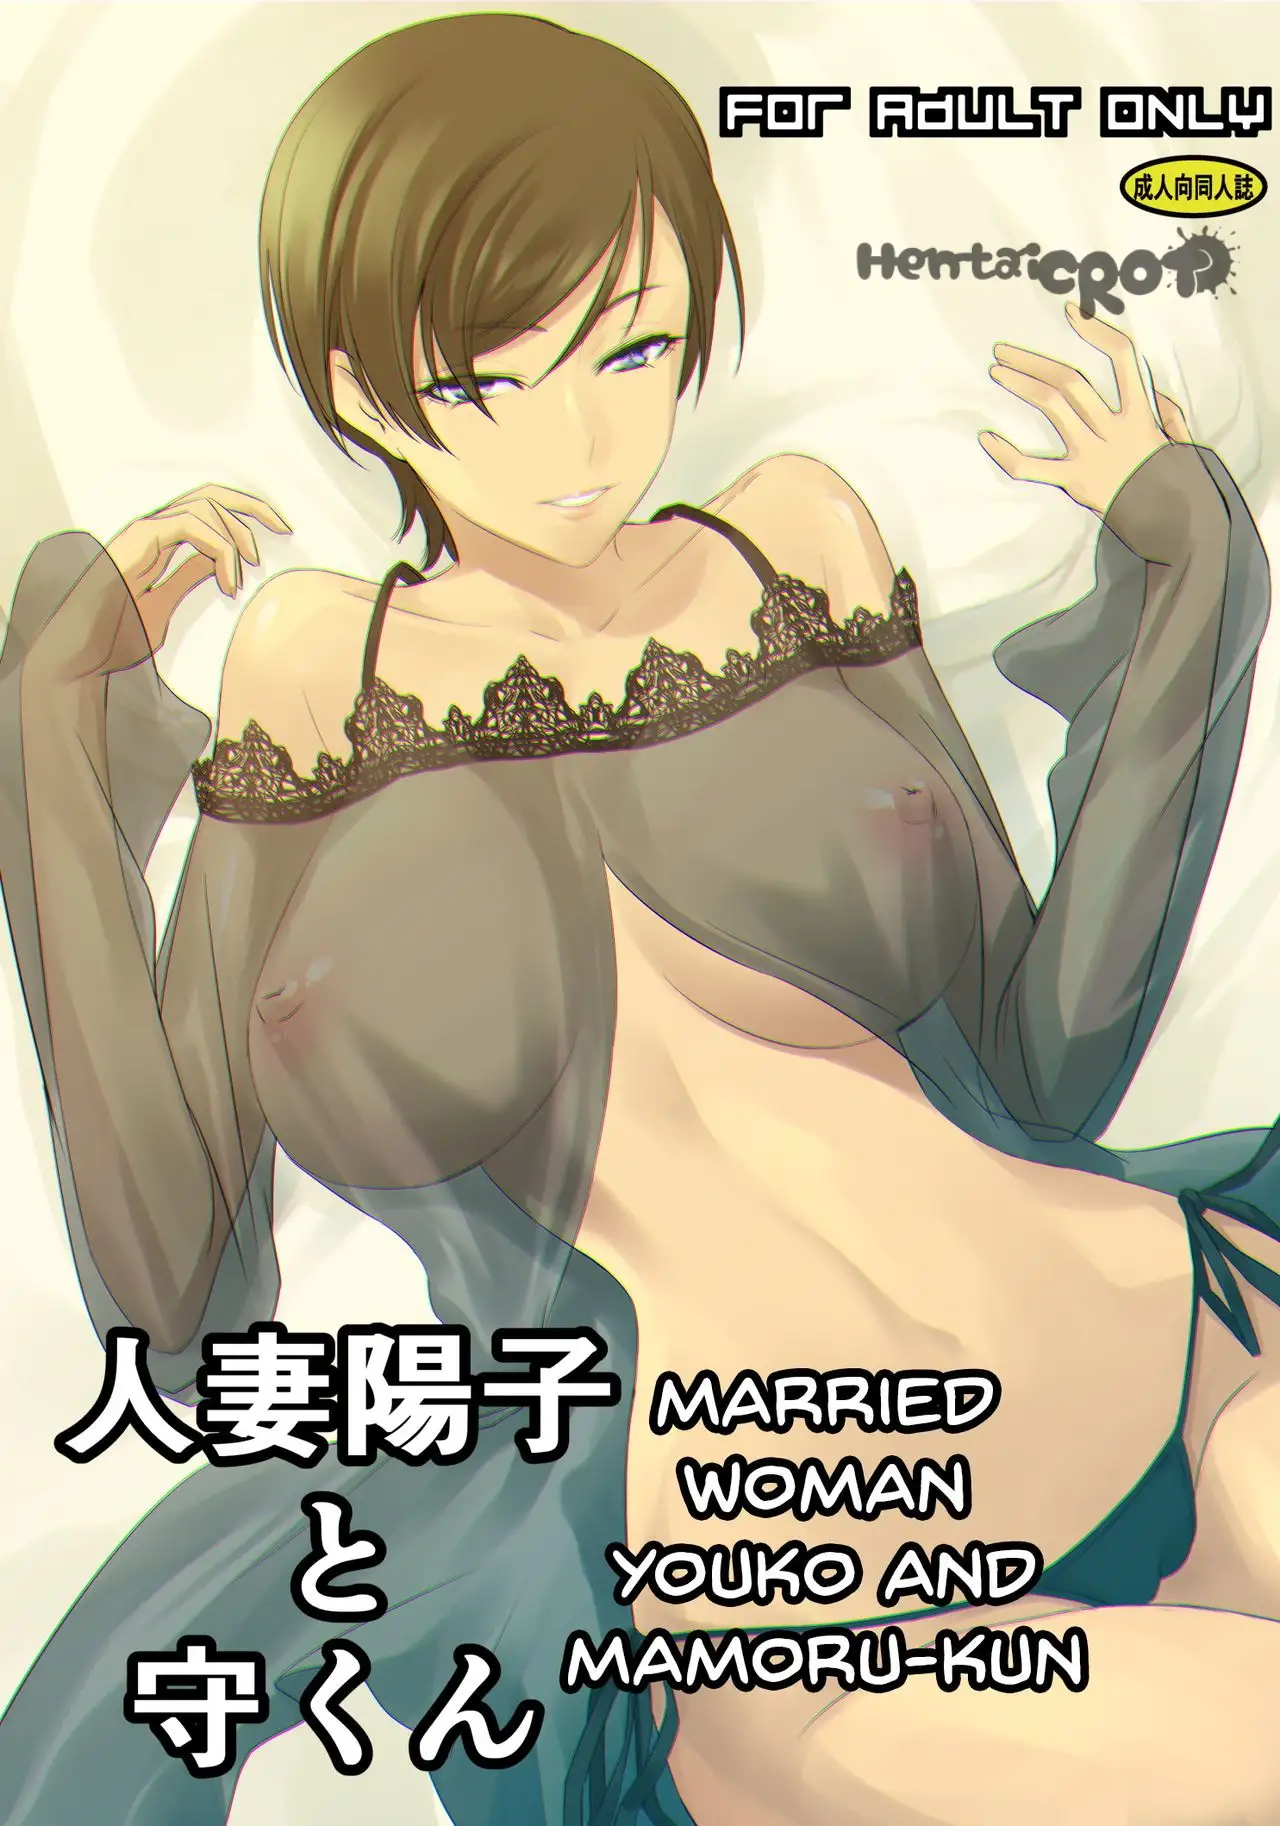 You are currently viewing Married Woman Youko and Mamoru-kun